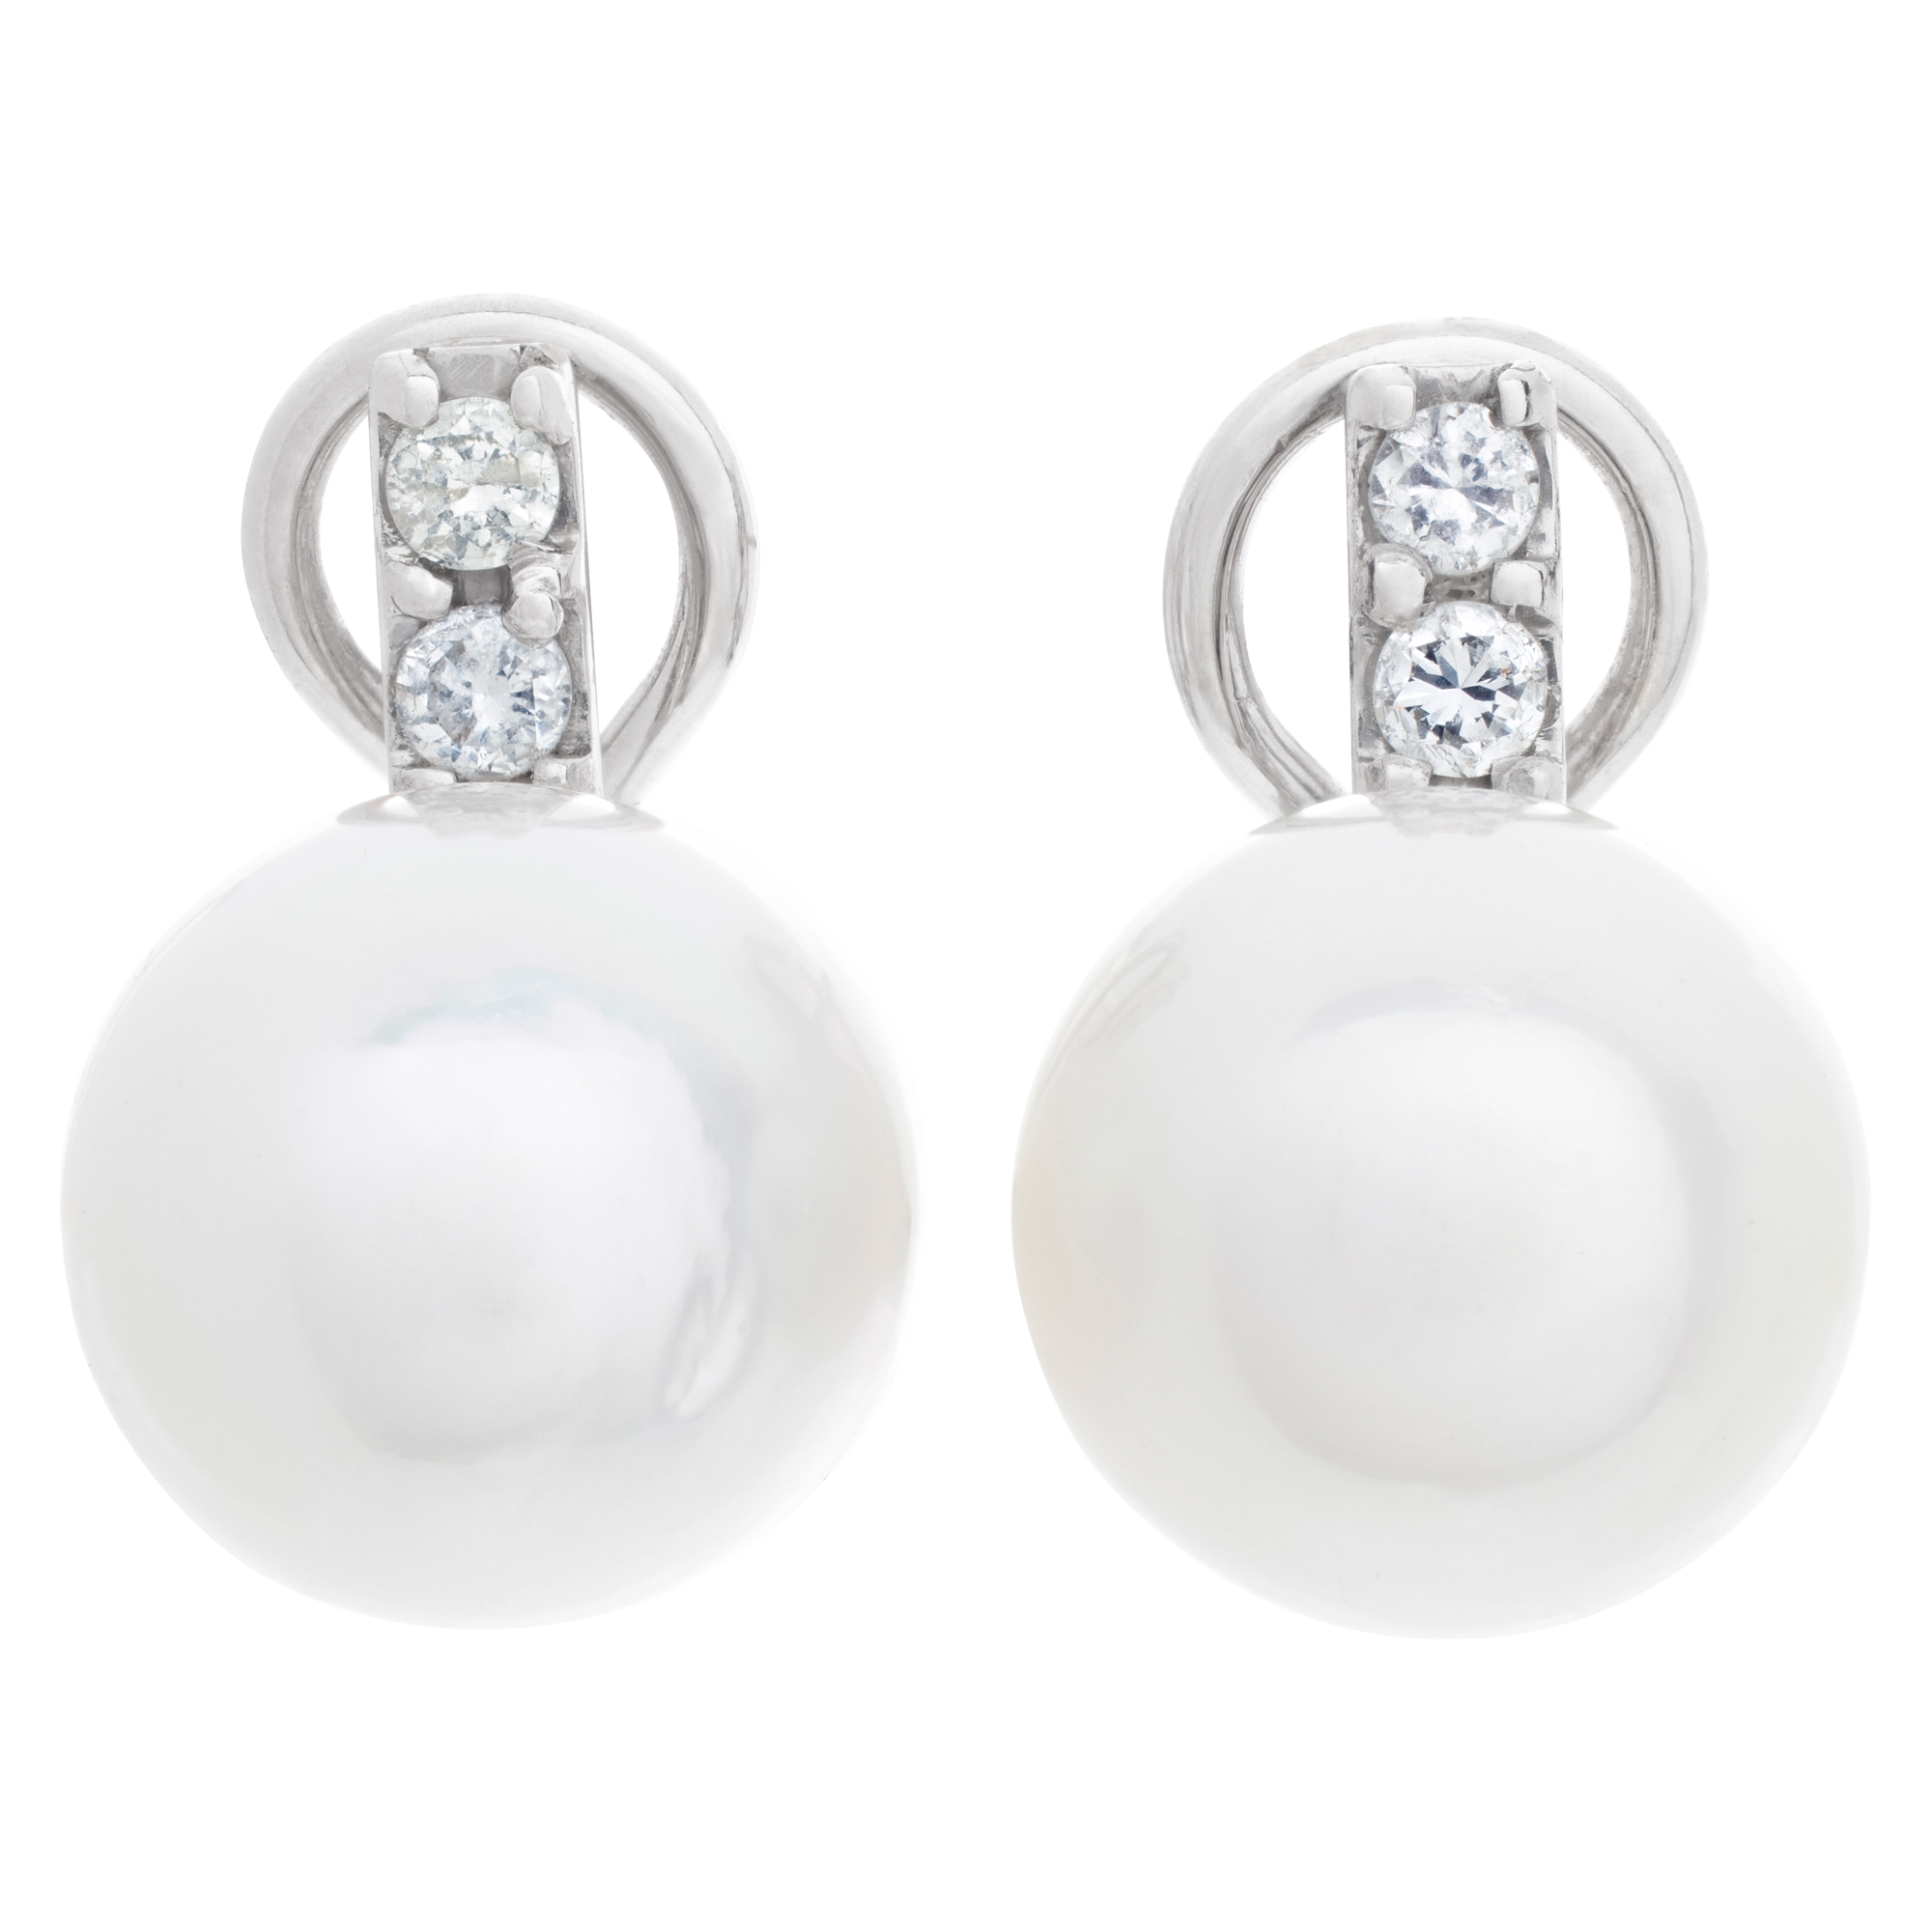 Pearl and diamond earrings in 14k white gold